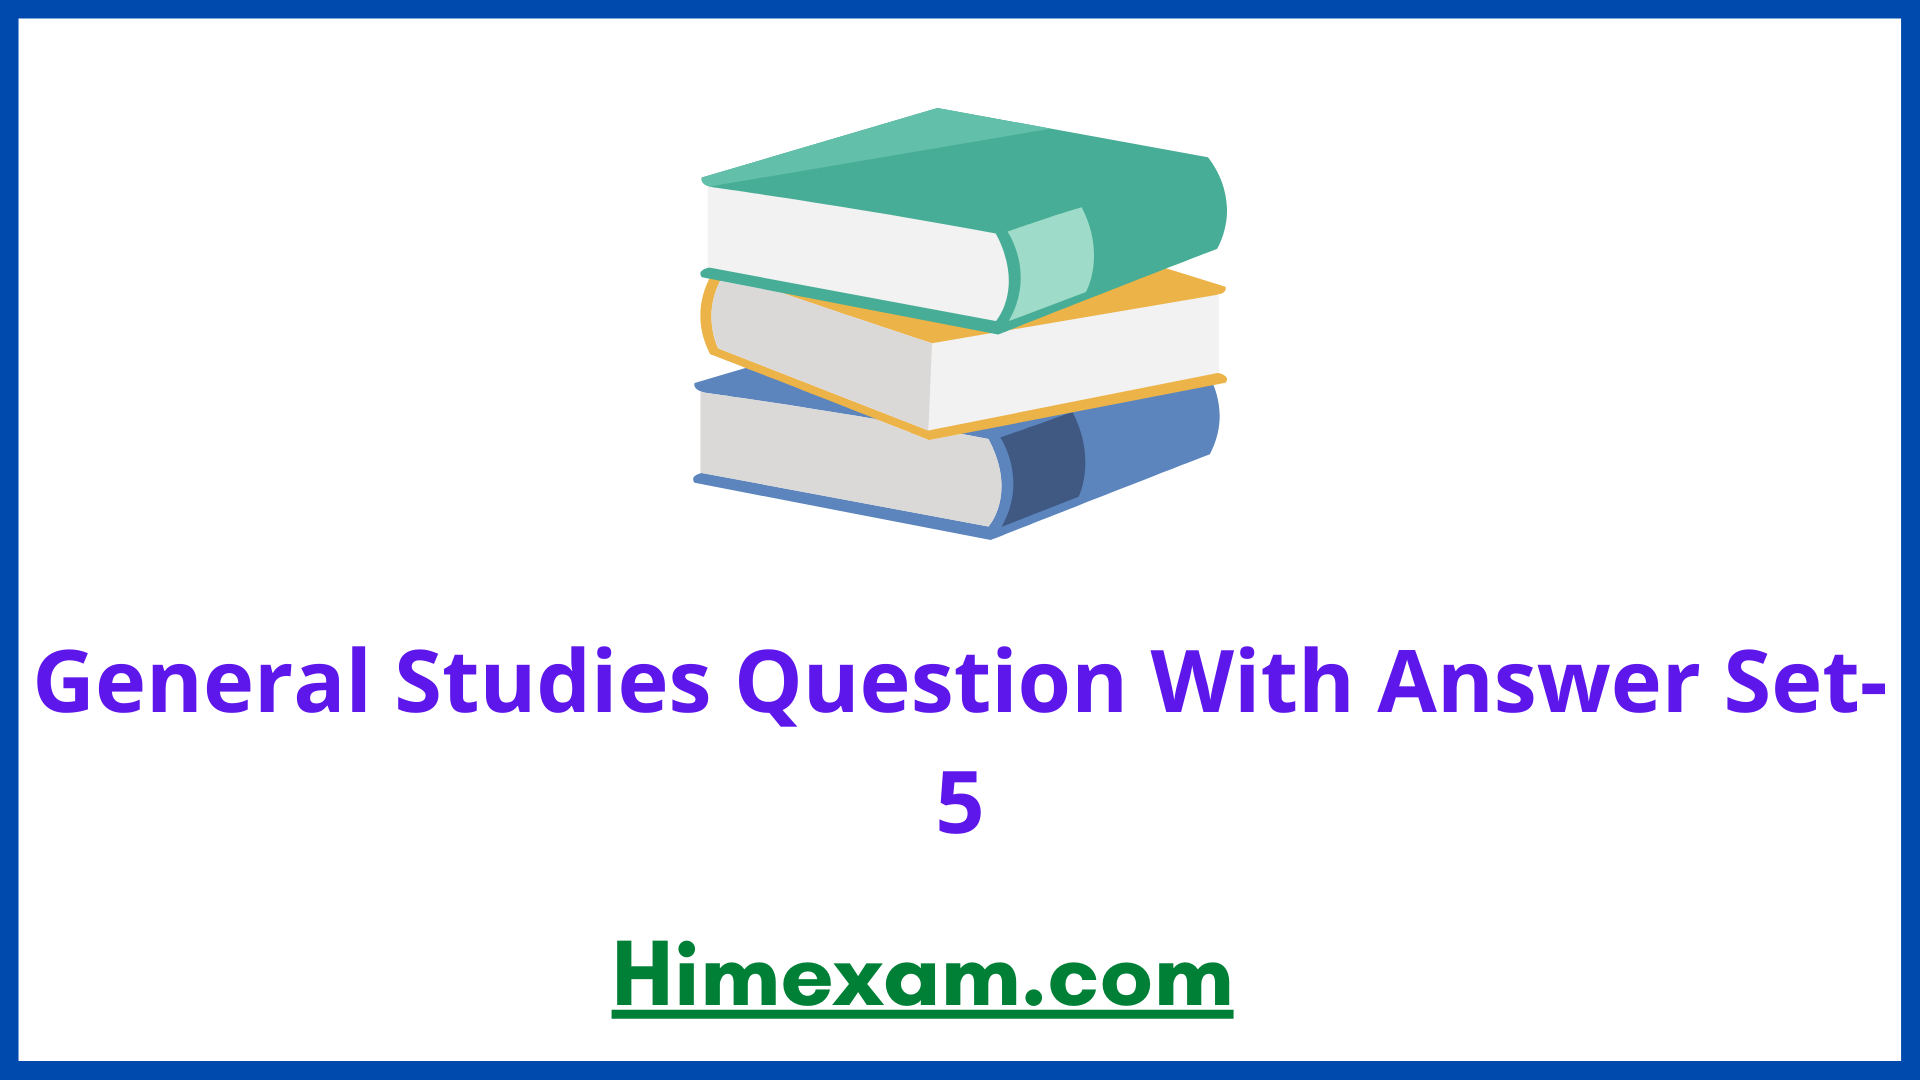 General Studies Question With Answer Set-5